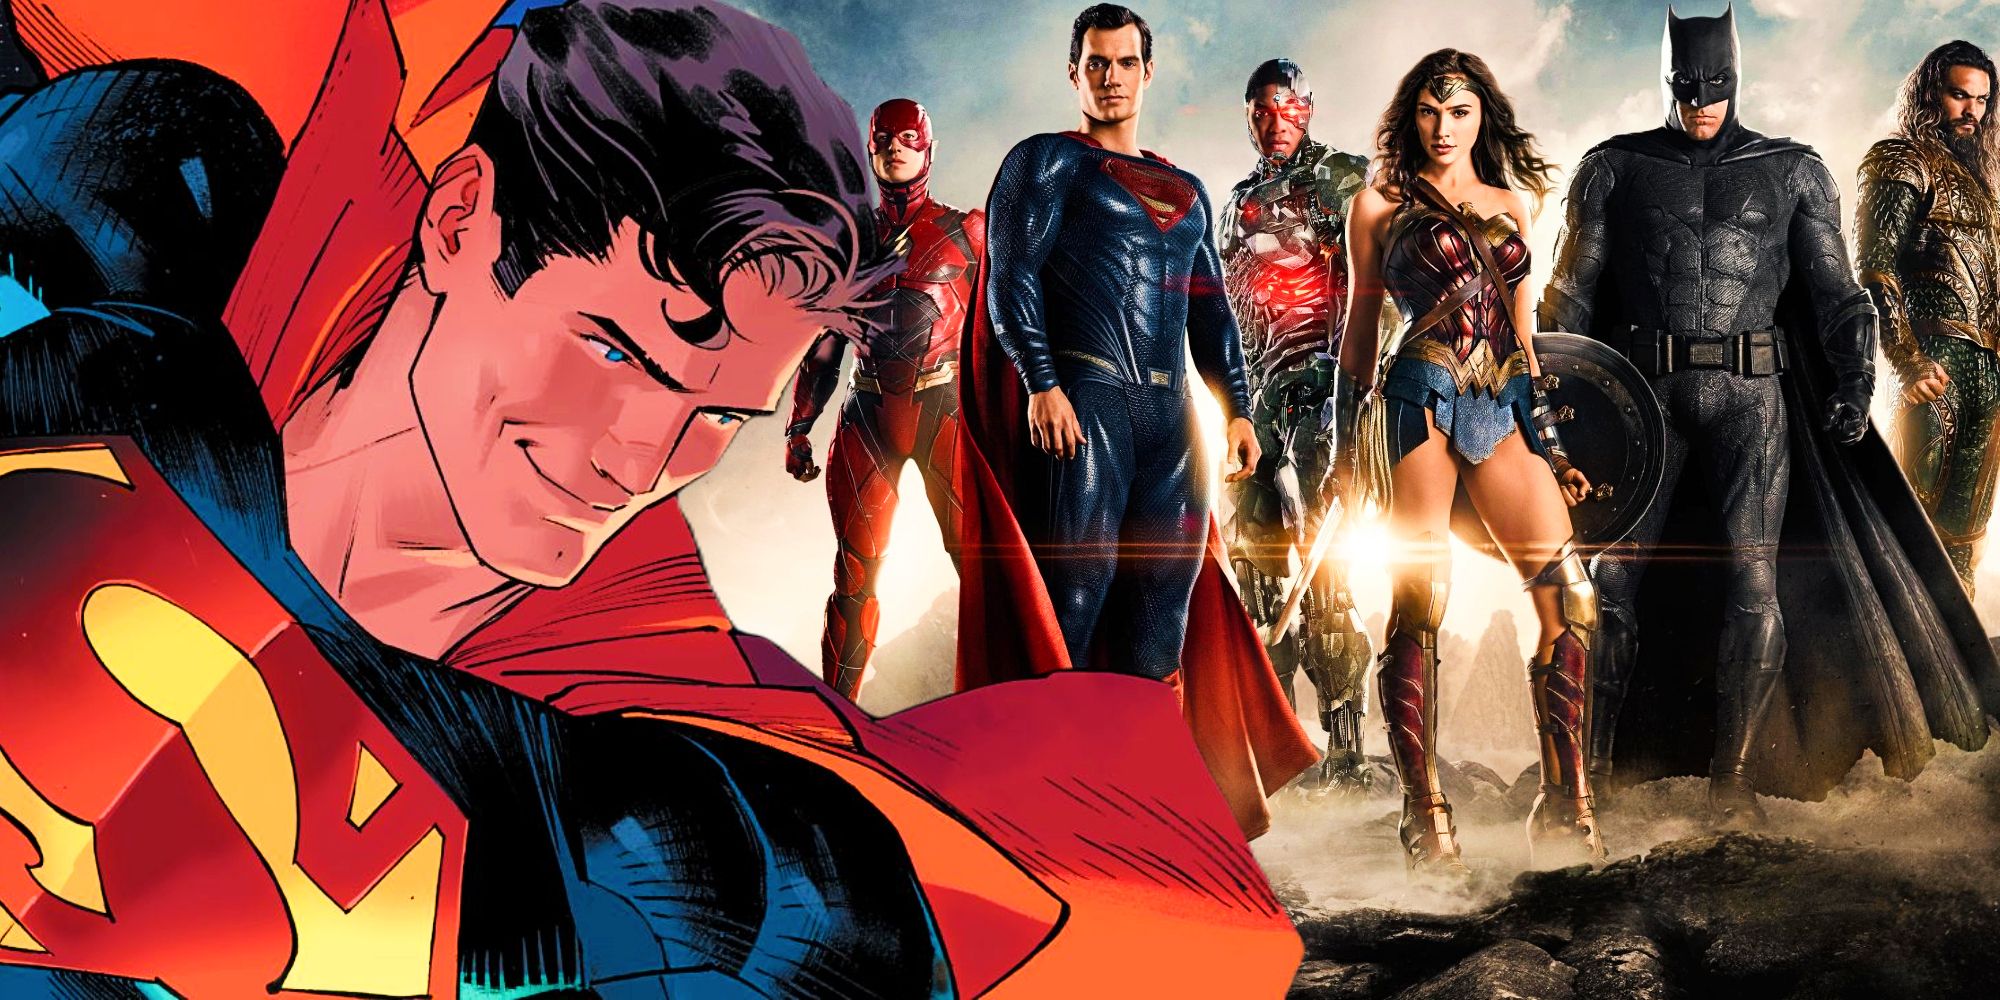 Superman in the comics and the Justice League